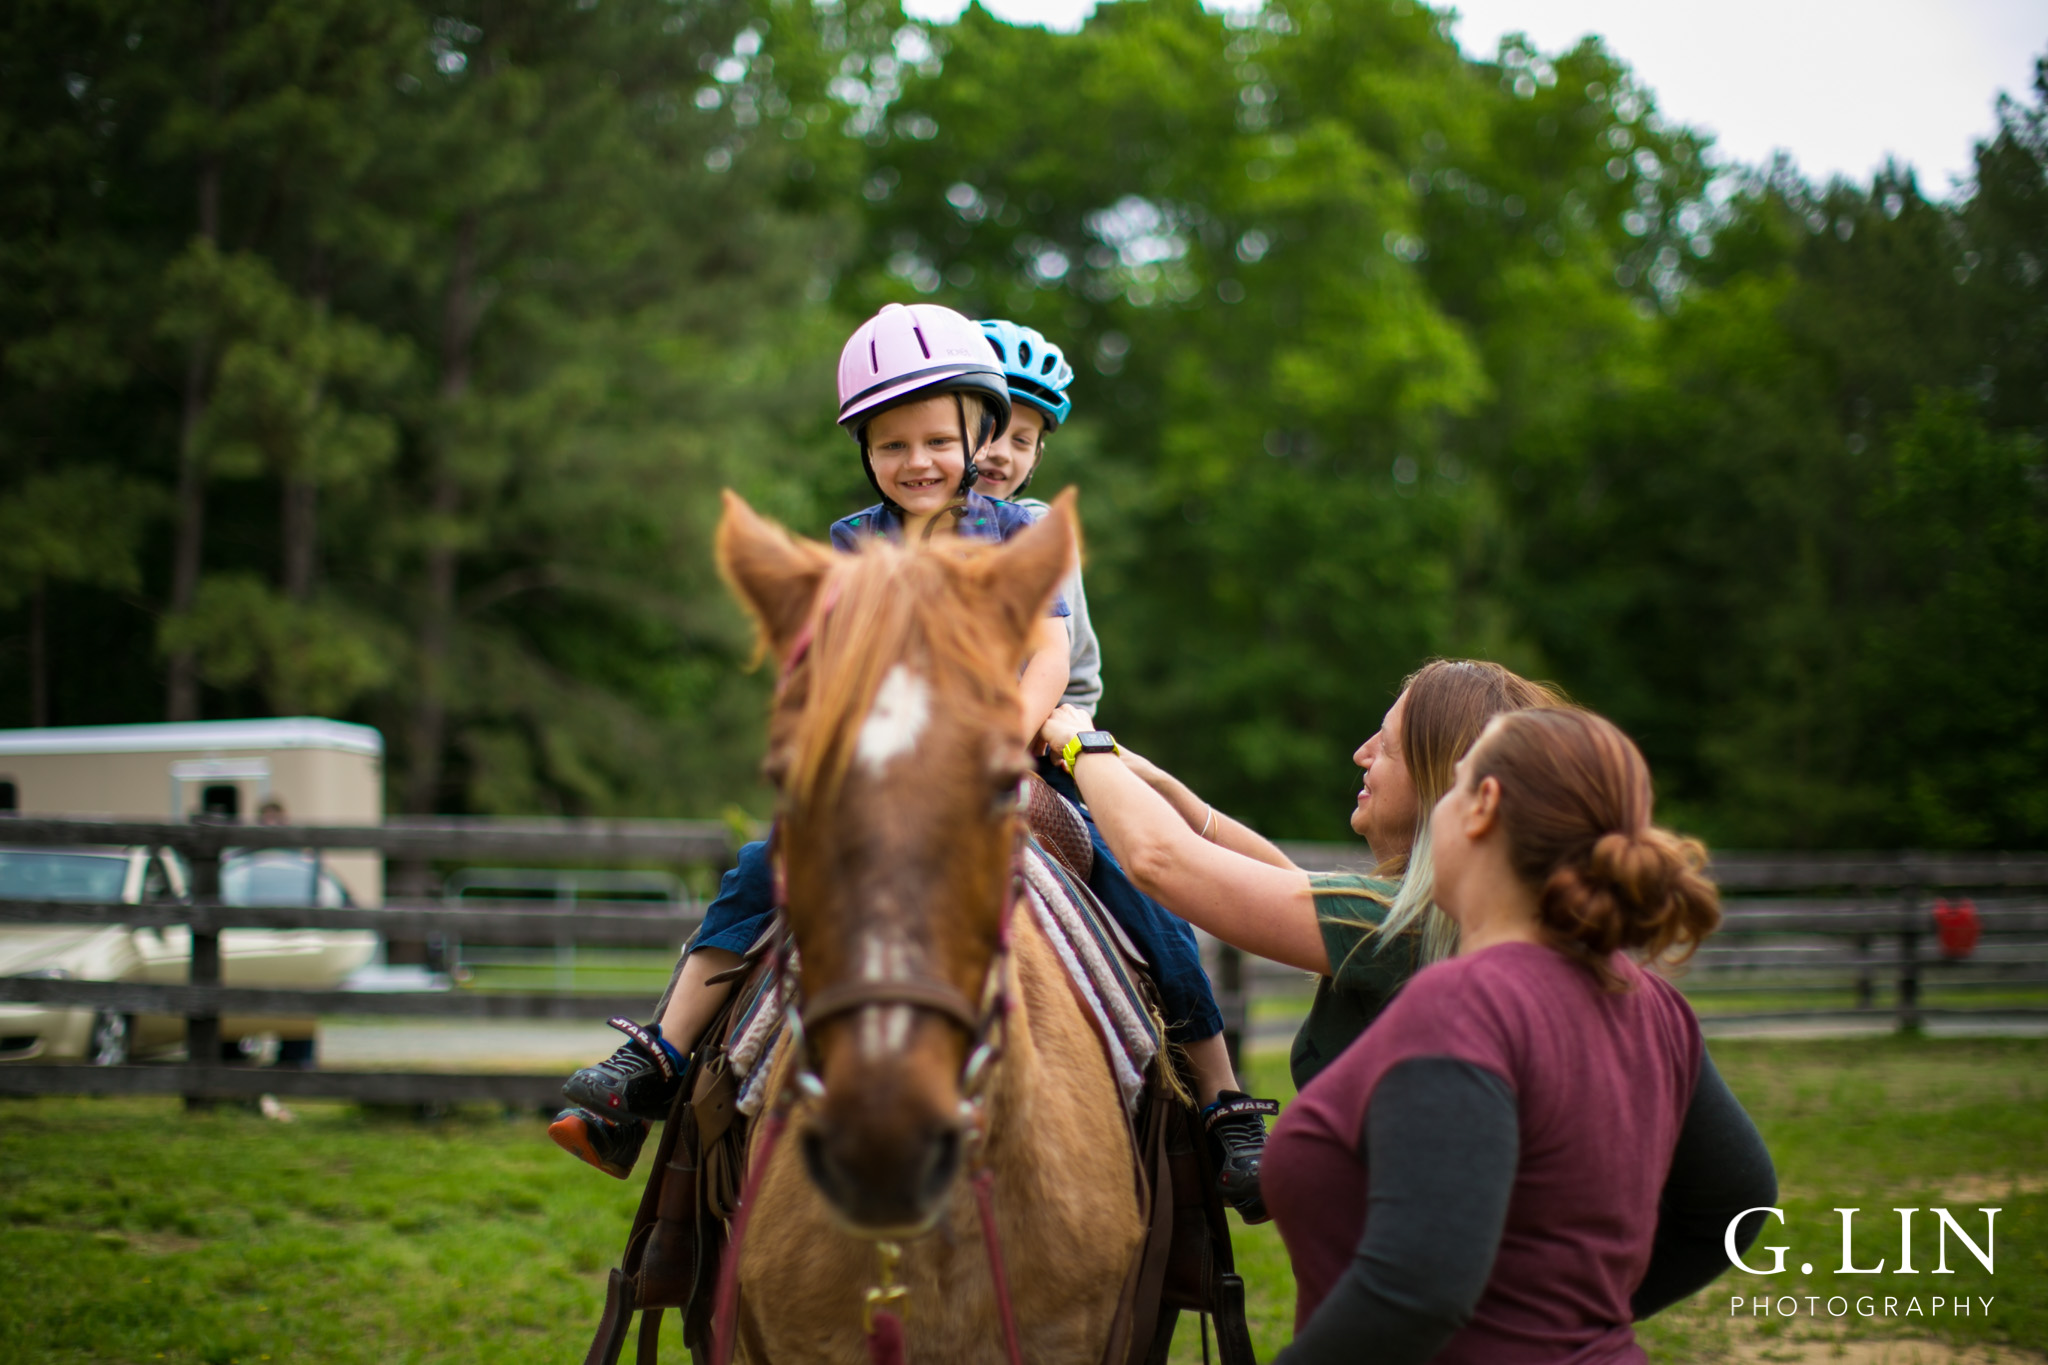 G. Lin Photography | Raleigh Event Photographer | Two boys on horse riding around the field